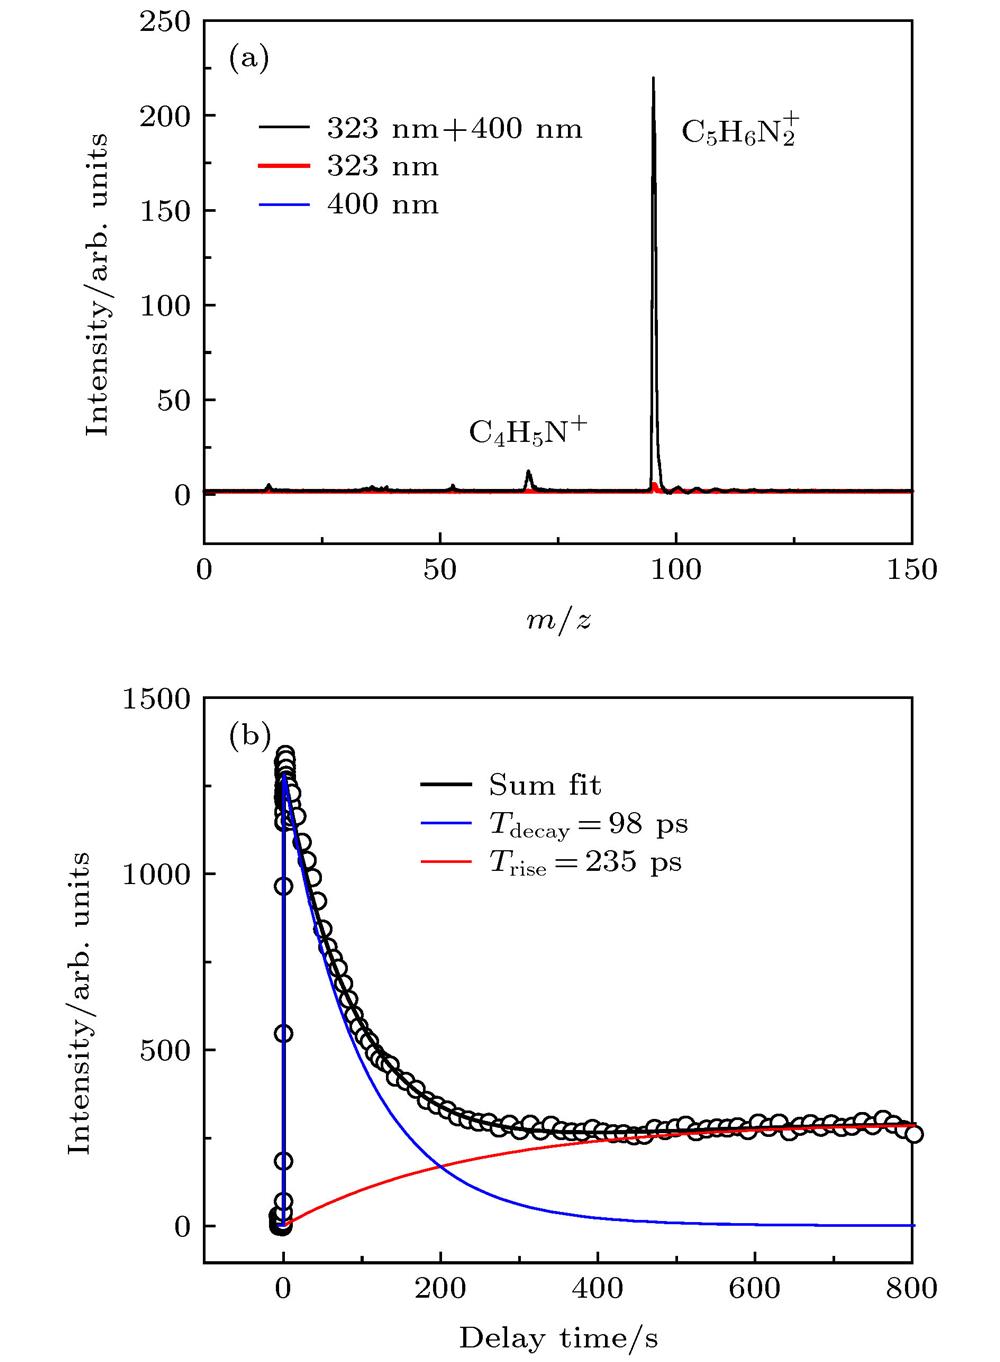 (a) Two color (at time overlap) and one color mass spectra of 2-methlypyrazine at 323 nm pump and 400 nm probe; (b) time-resolved total ion signals of parent ion as a function of delay time between the pump pulse at 323 nm and the probe pulse at 400 nm. The circles are the experimental results, and solid lines are the fitting results.